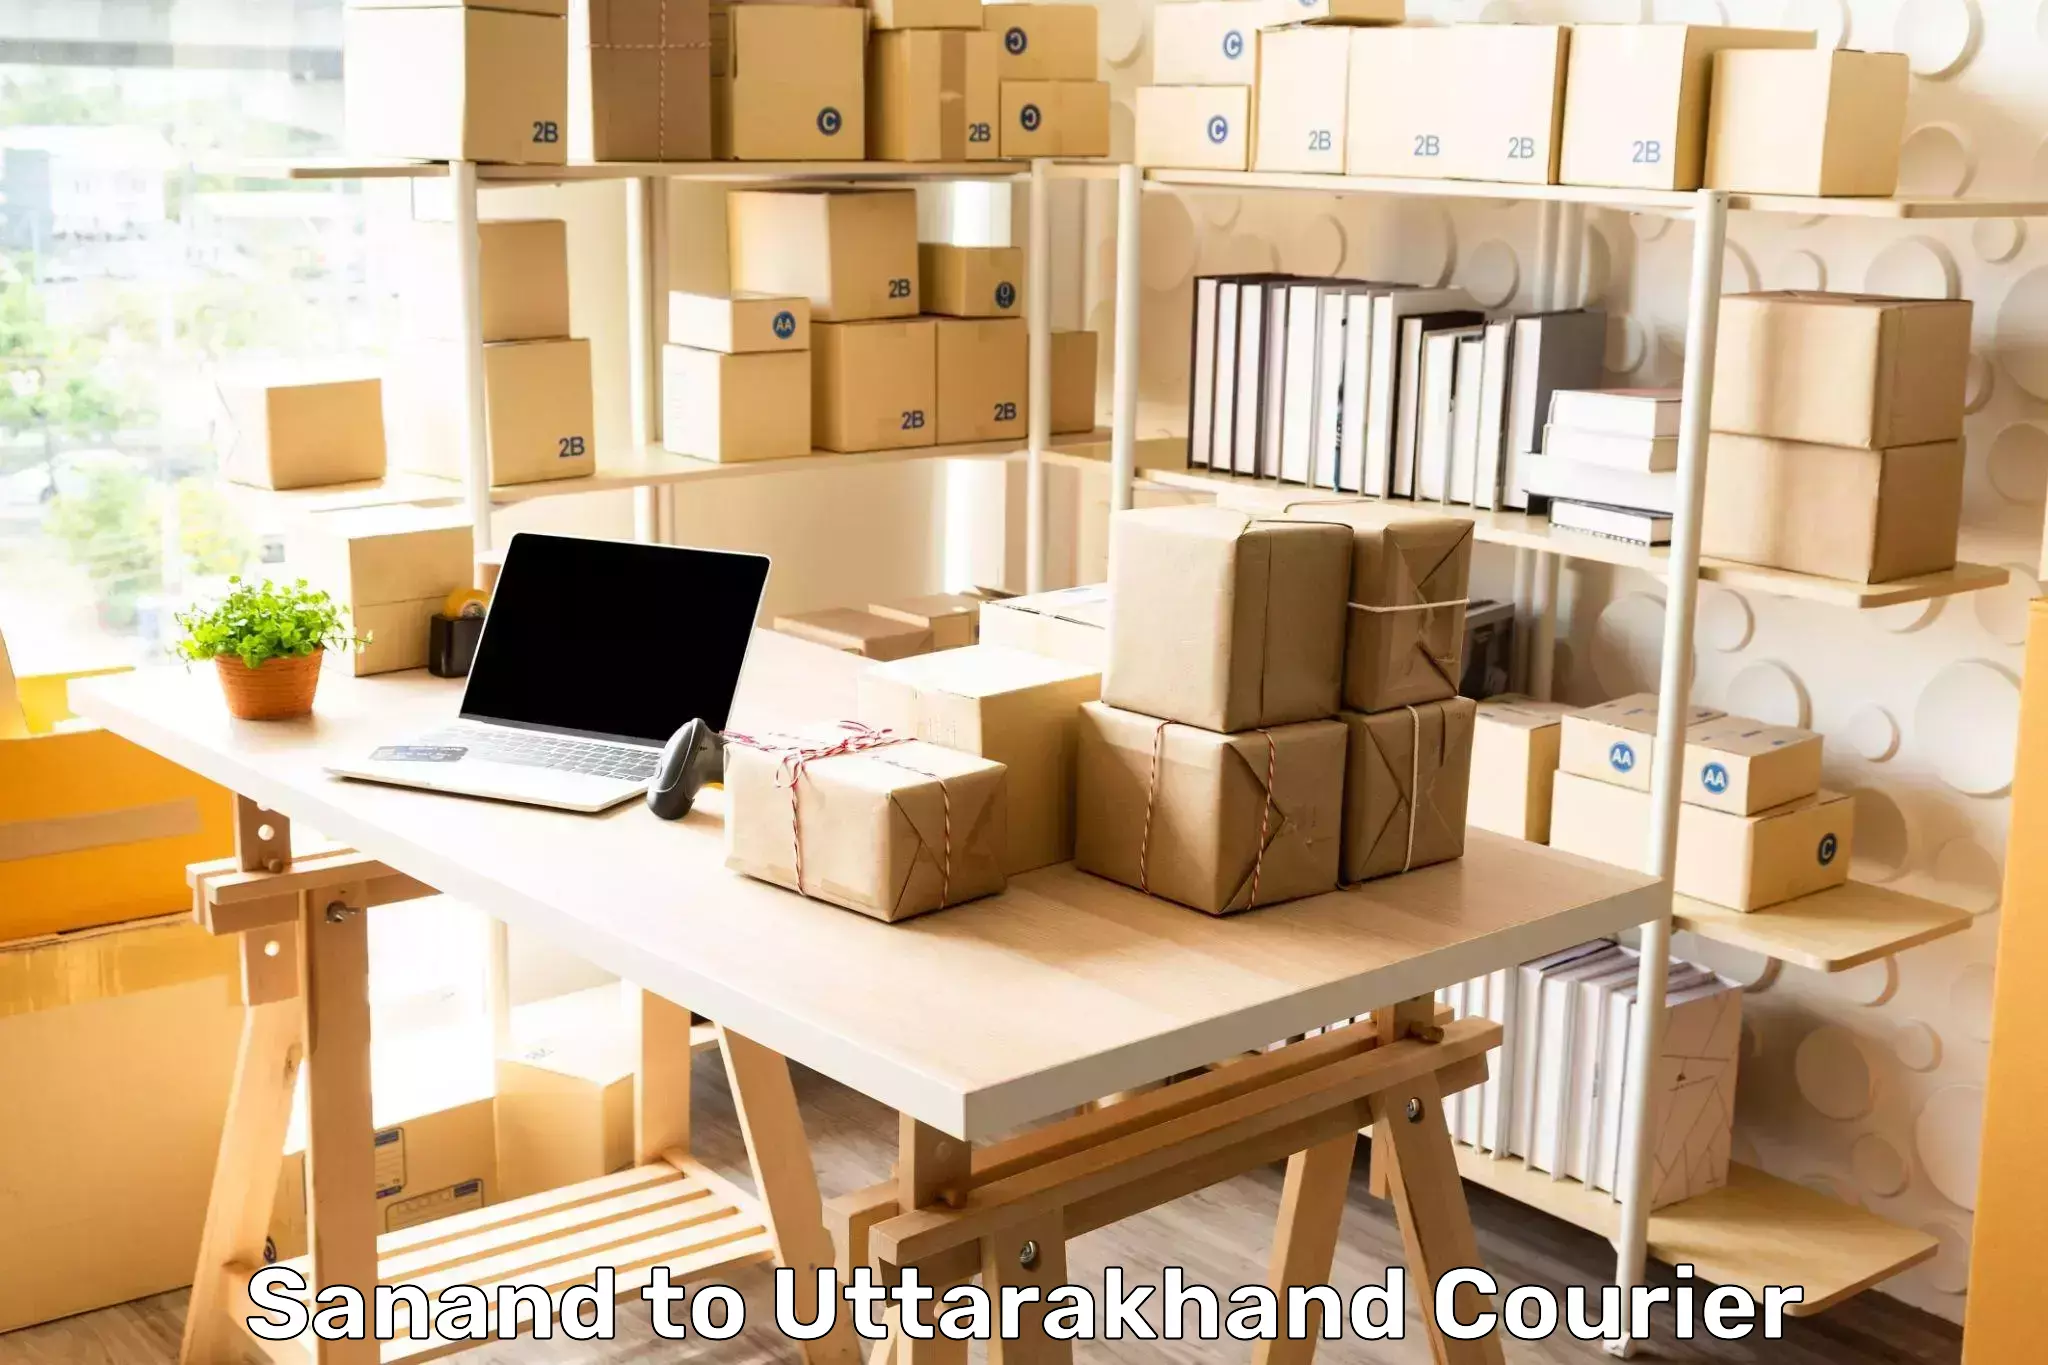 Parcel service for businesses Sanand to Paithani